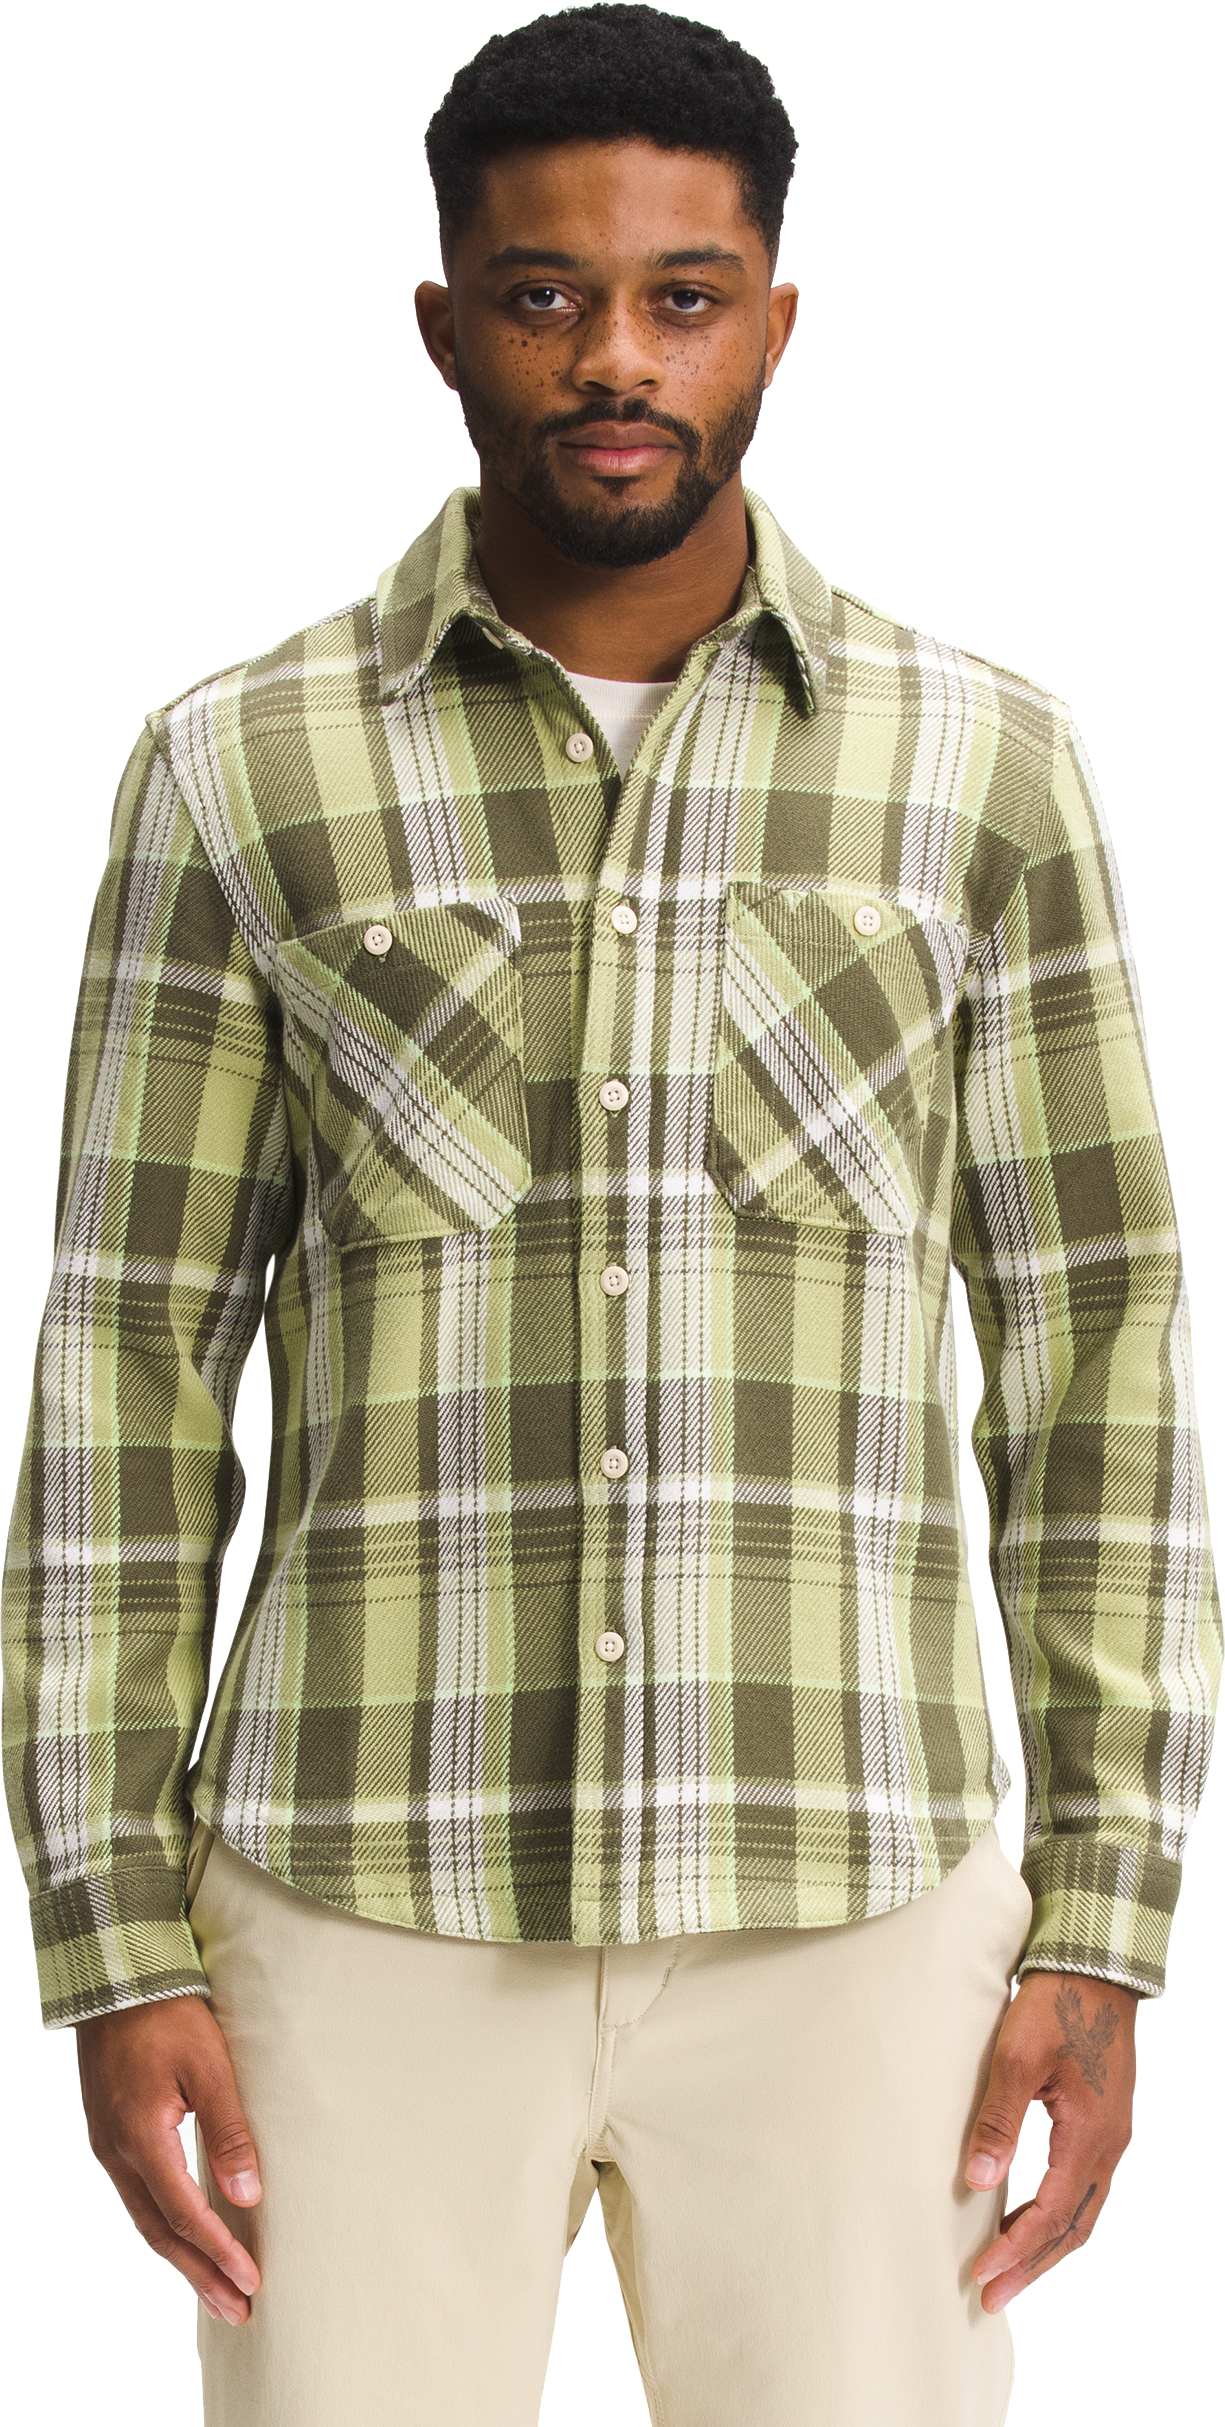 The North Face Valley Twill Flannel Long-Sleeve Shirt for Men